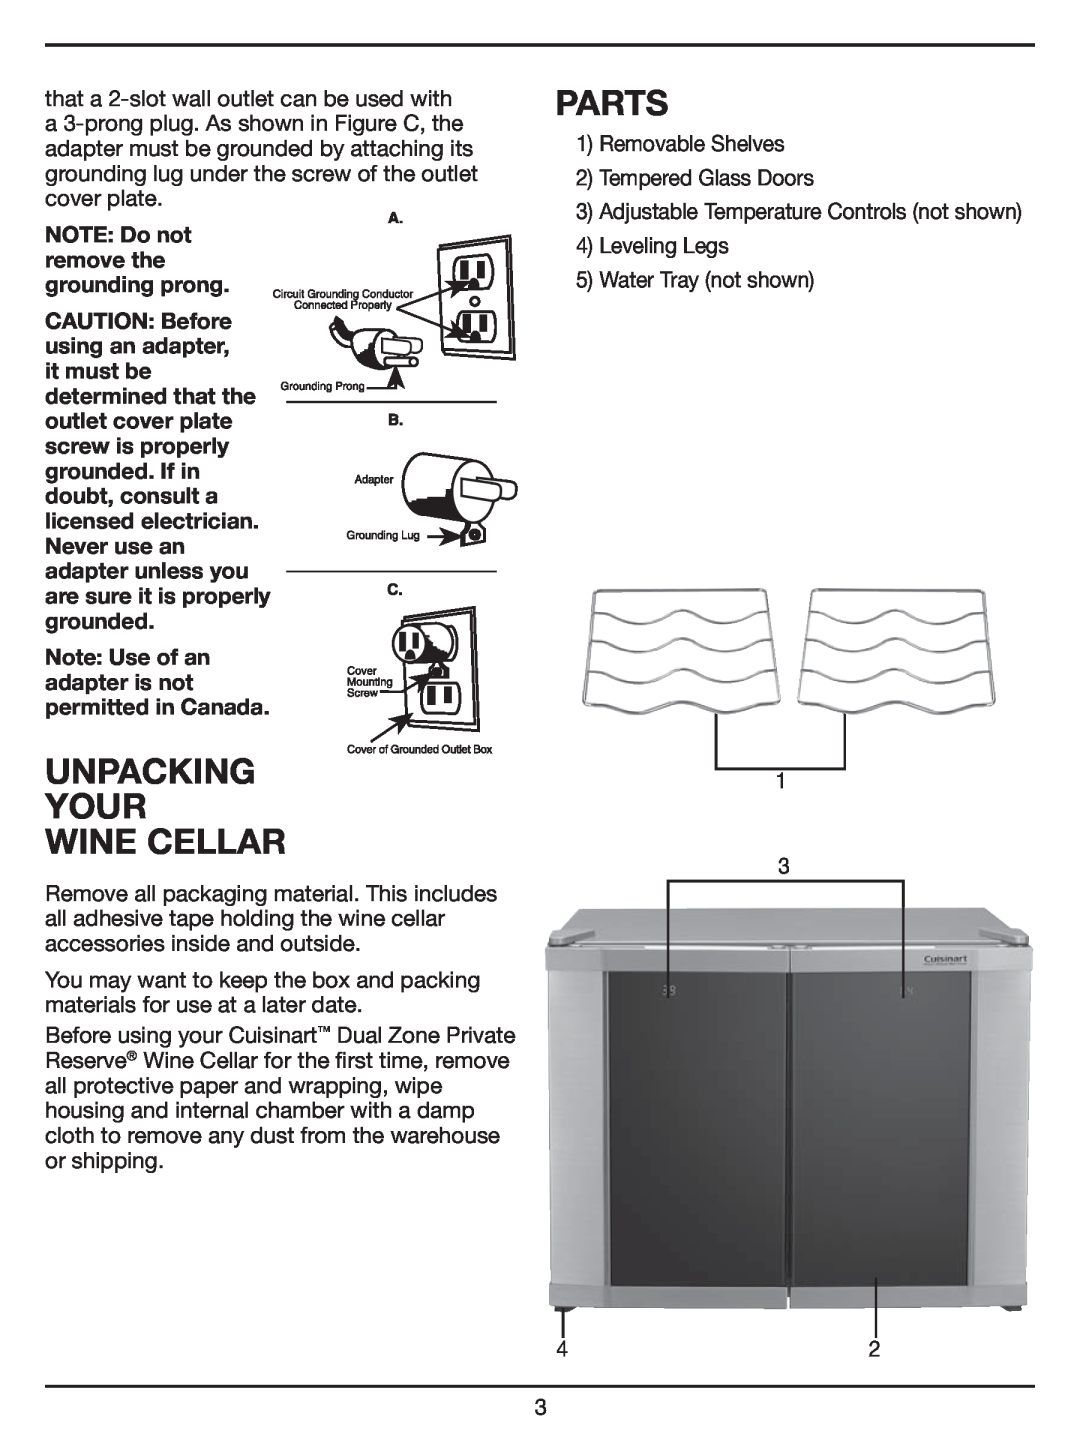 Cuisinart Dual Zone Private Reserve Wine Cellar Unpacking Your Wine Cellar, Parts, NOTE Do not remove the grounding prong 